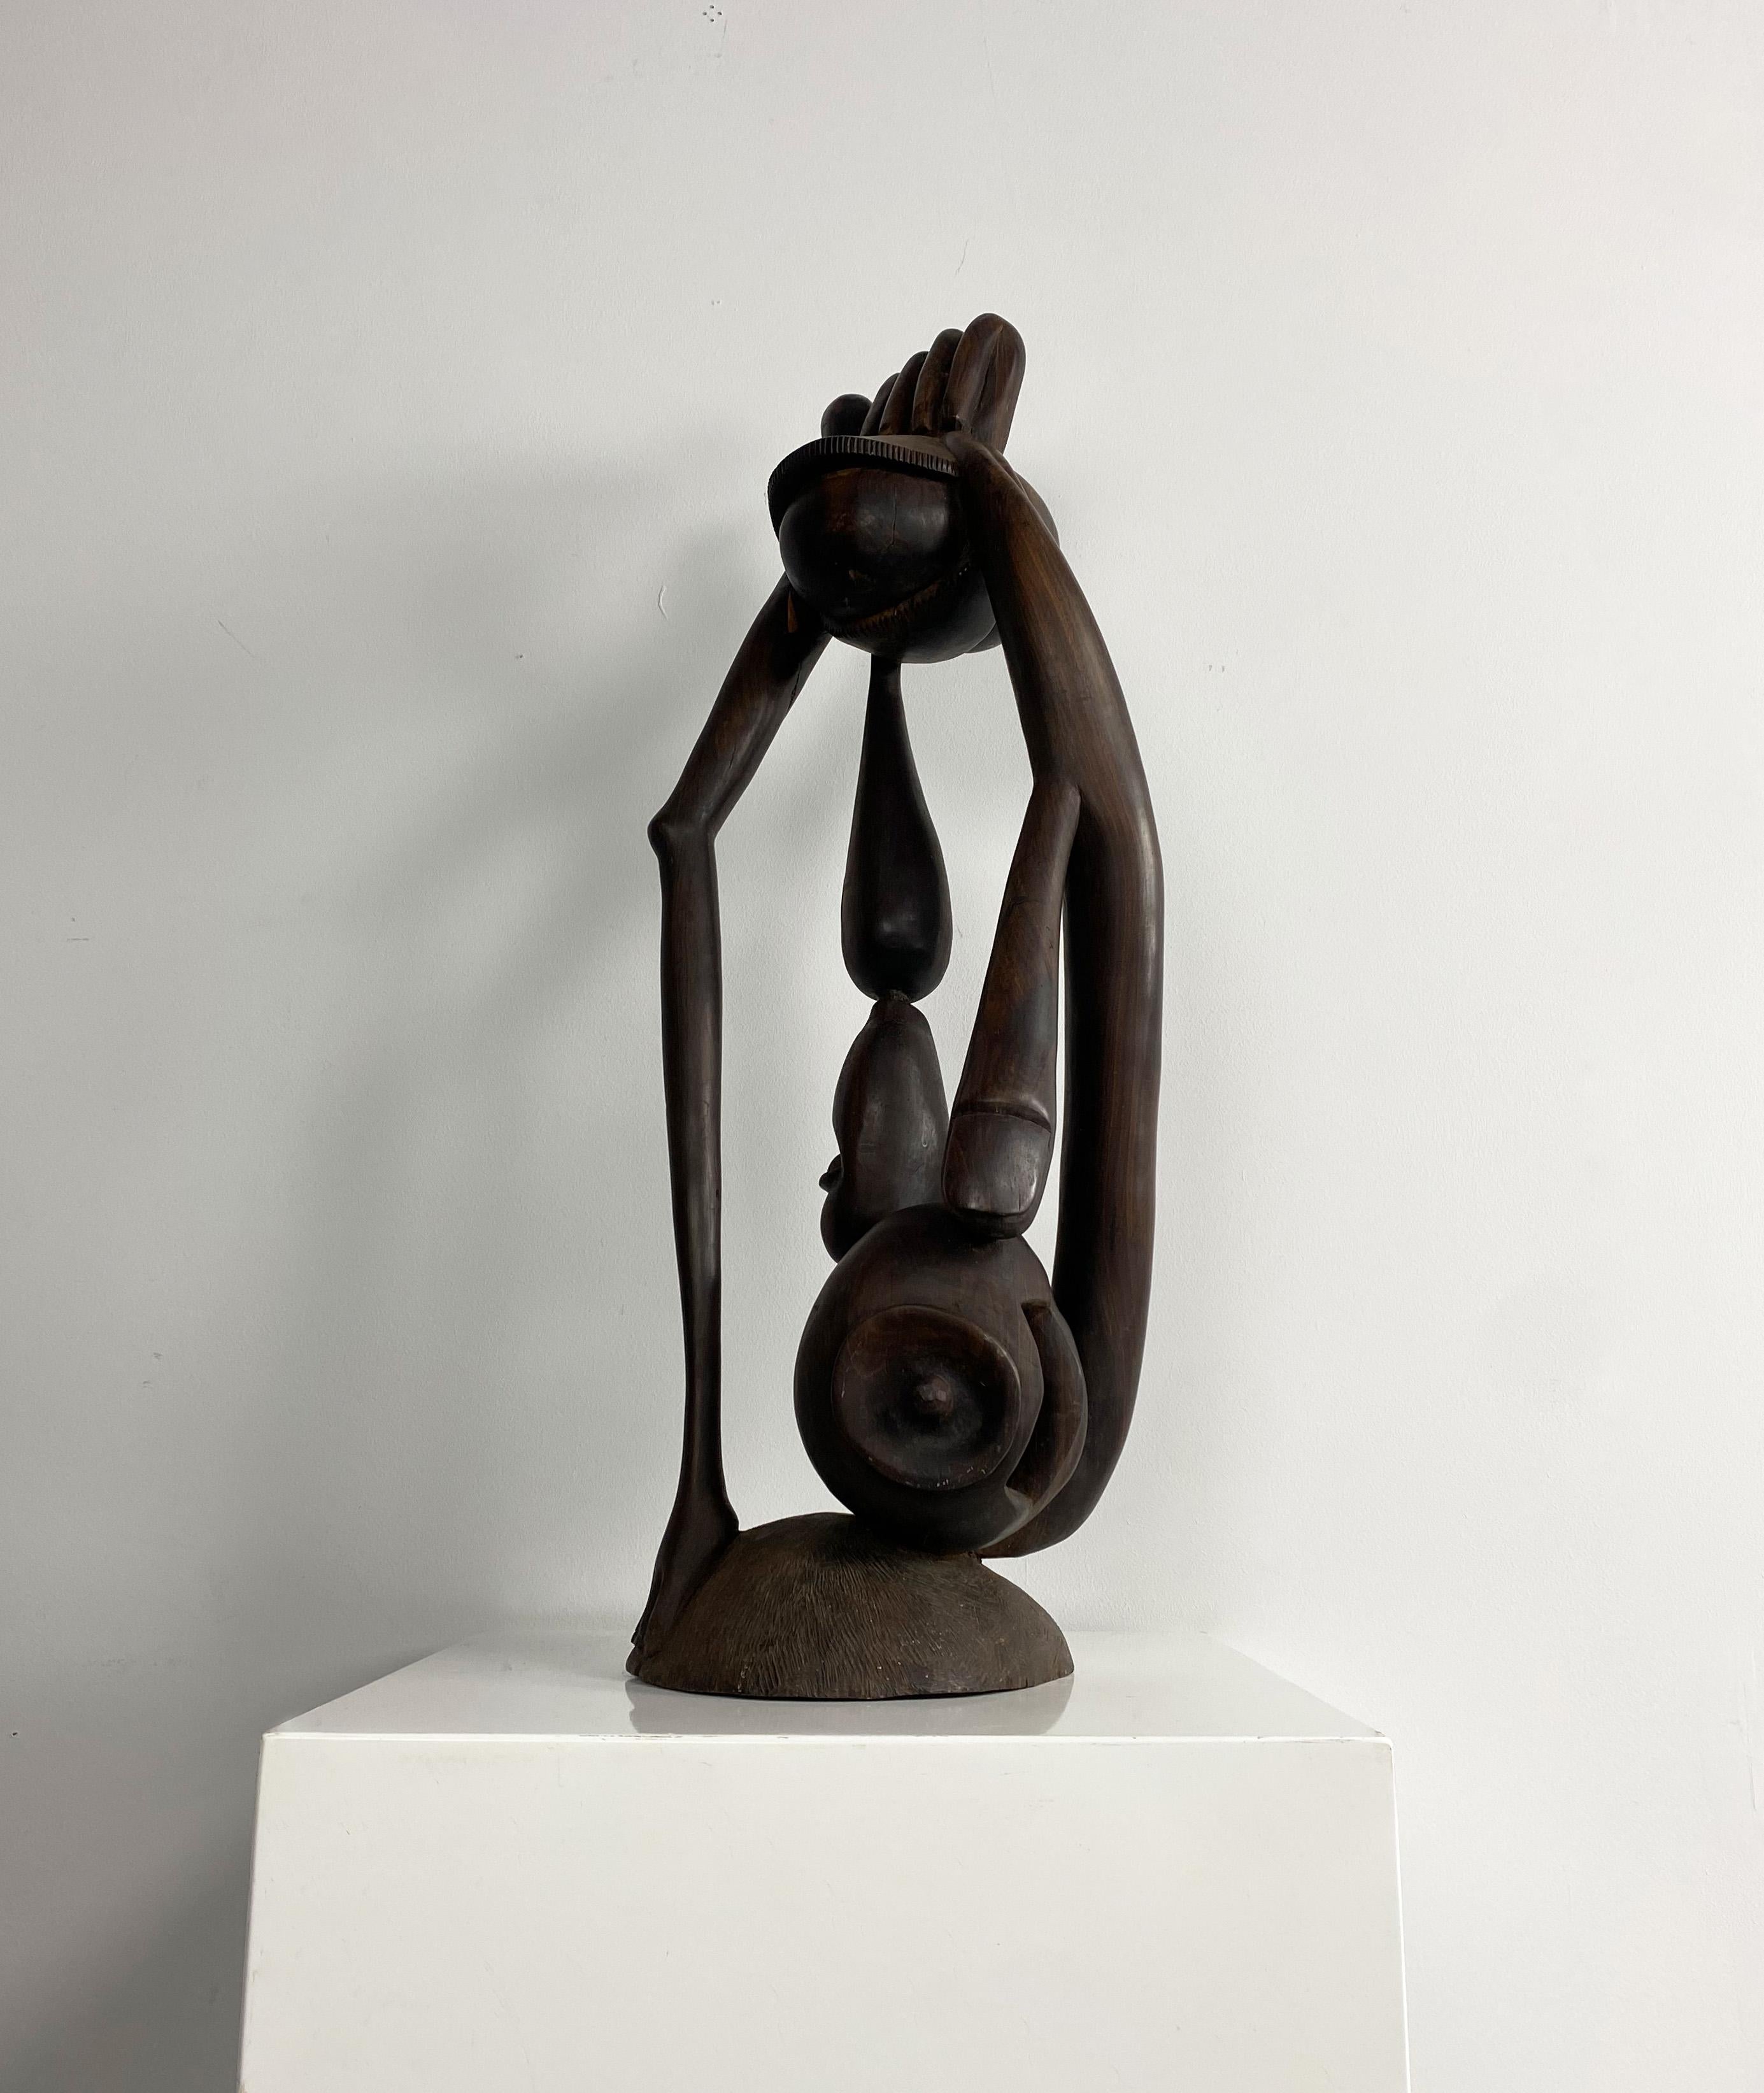 Vintage abstract African sculpture. 

Dimensions (cm, approx): 
Height: 76
Width: 27
Depth: 27.